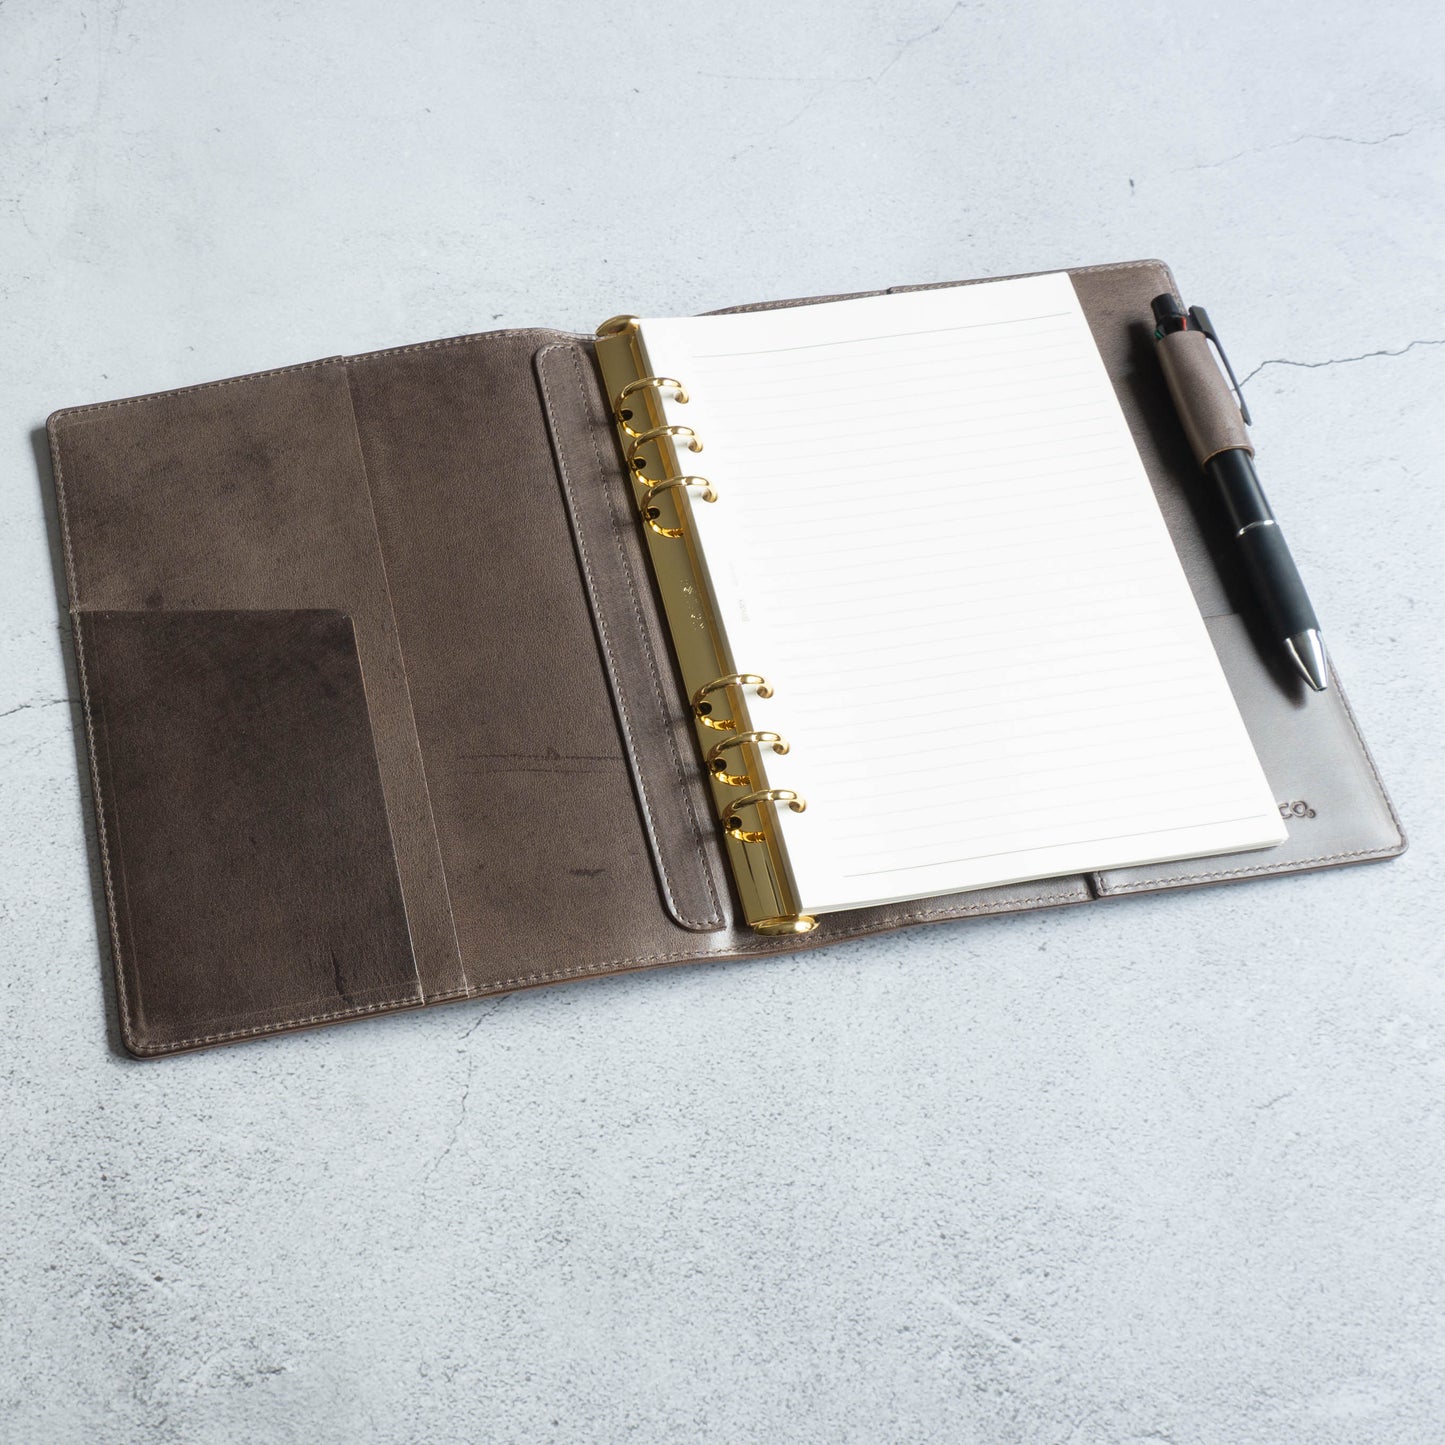 C&L TRASCO ≪Diago series≫ System notebook A5 size (inner diameter 20mm ring) Genuine leather (Italian leather)